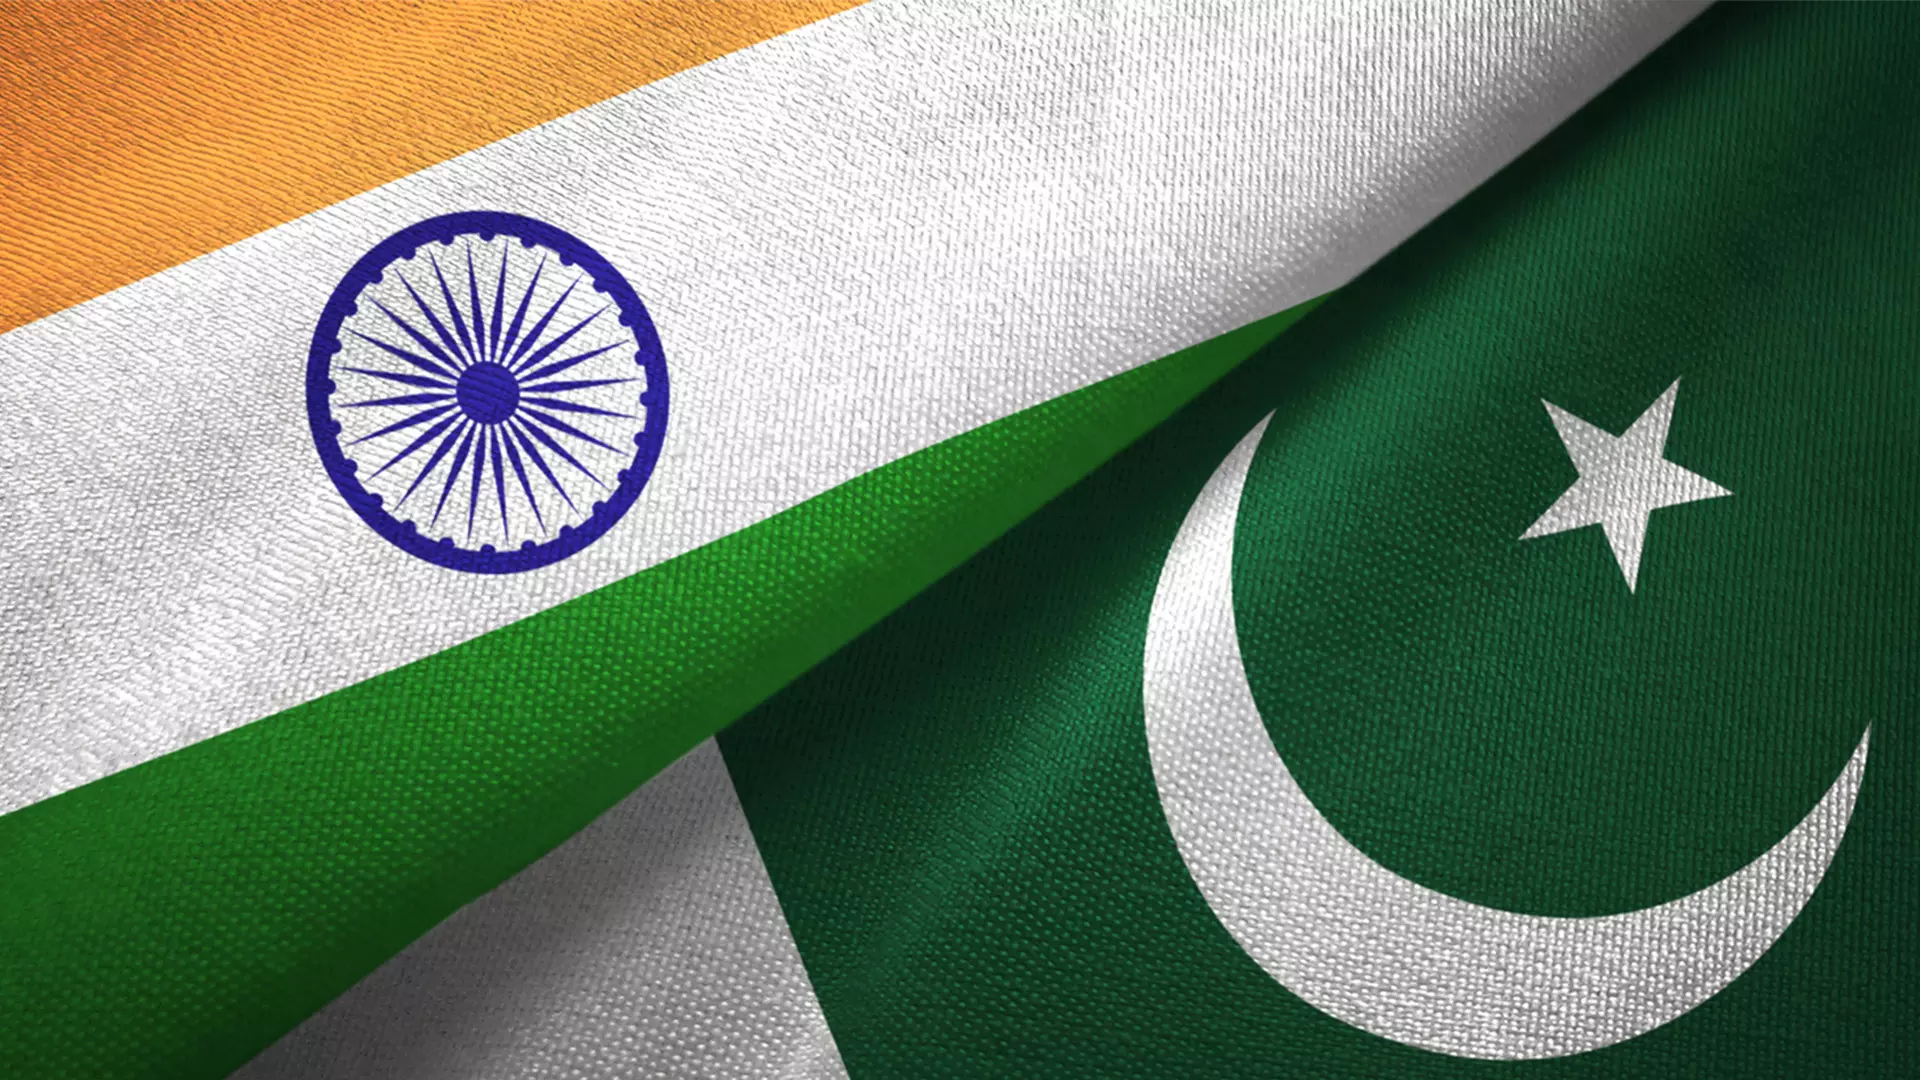 Pakistan cries foul over vessel seizure by India, calls it unjustified